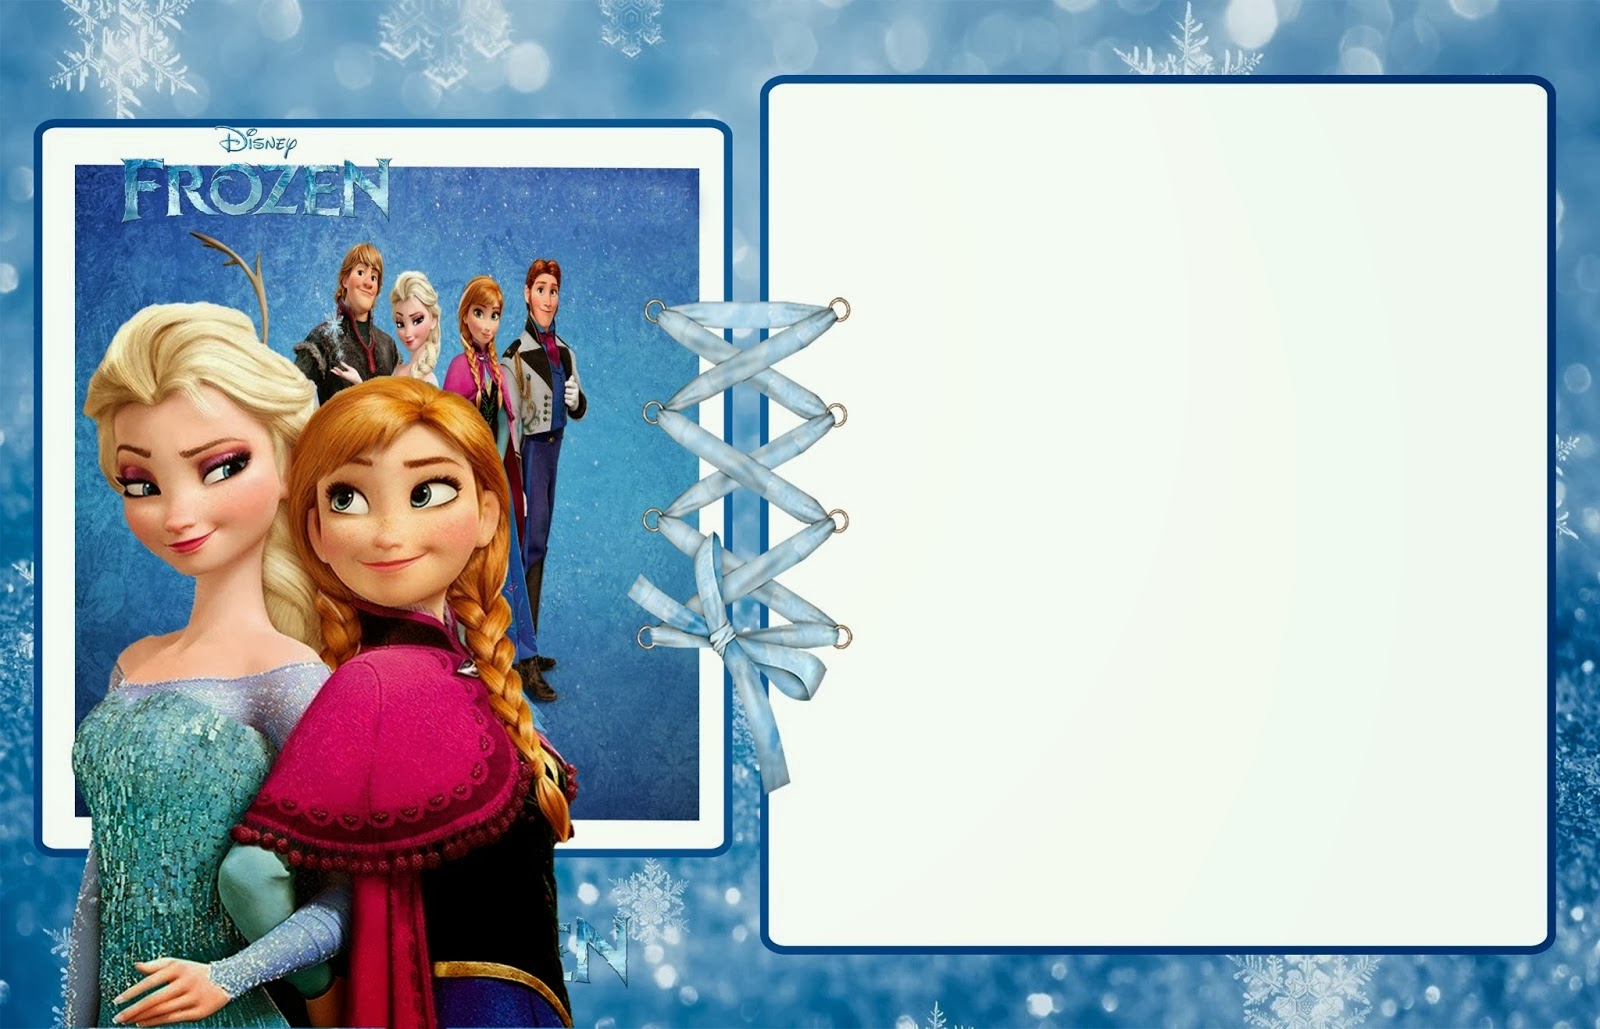 Frozen Party: Free Printable Invitations. | Oh My Fiesta! In English - Free Printable Frozen Birthday Invitations